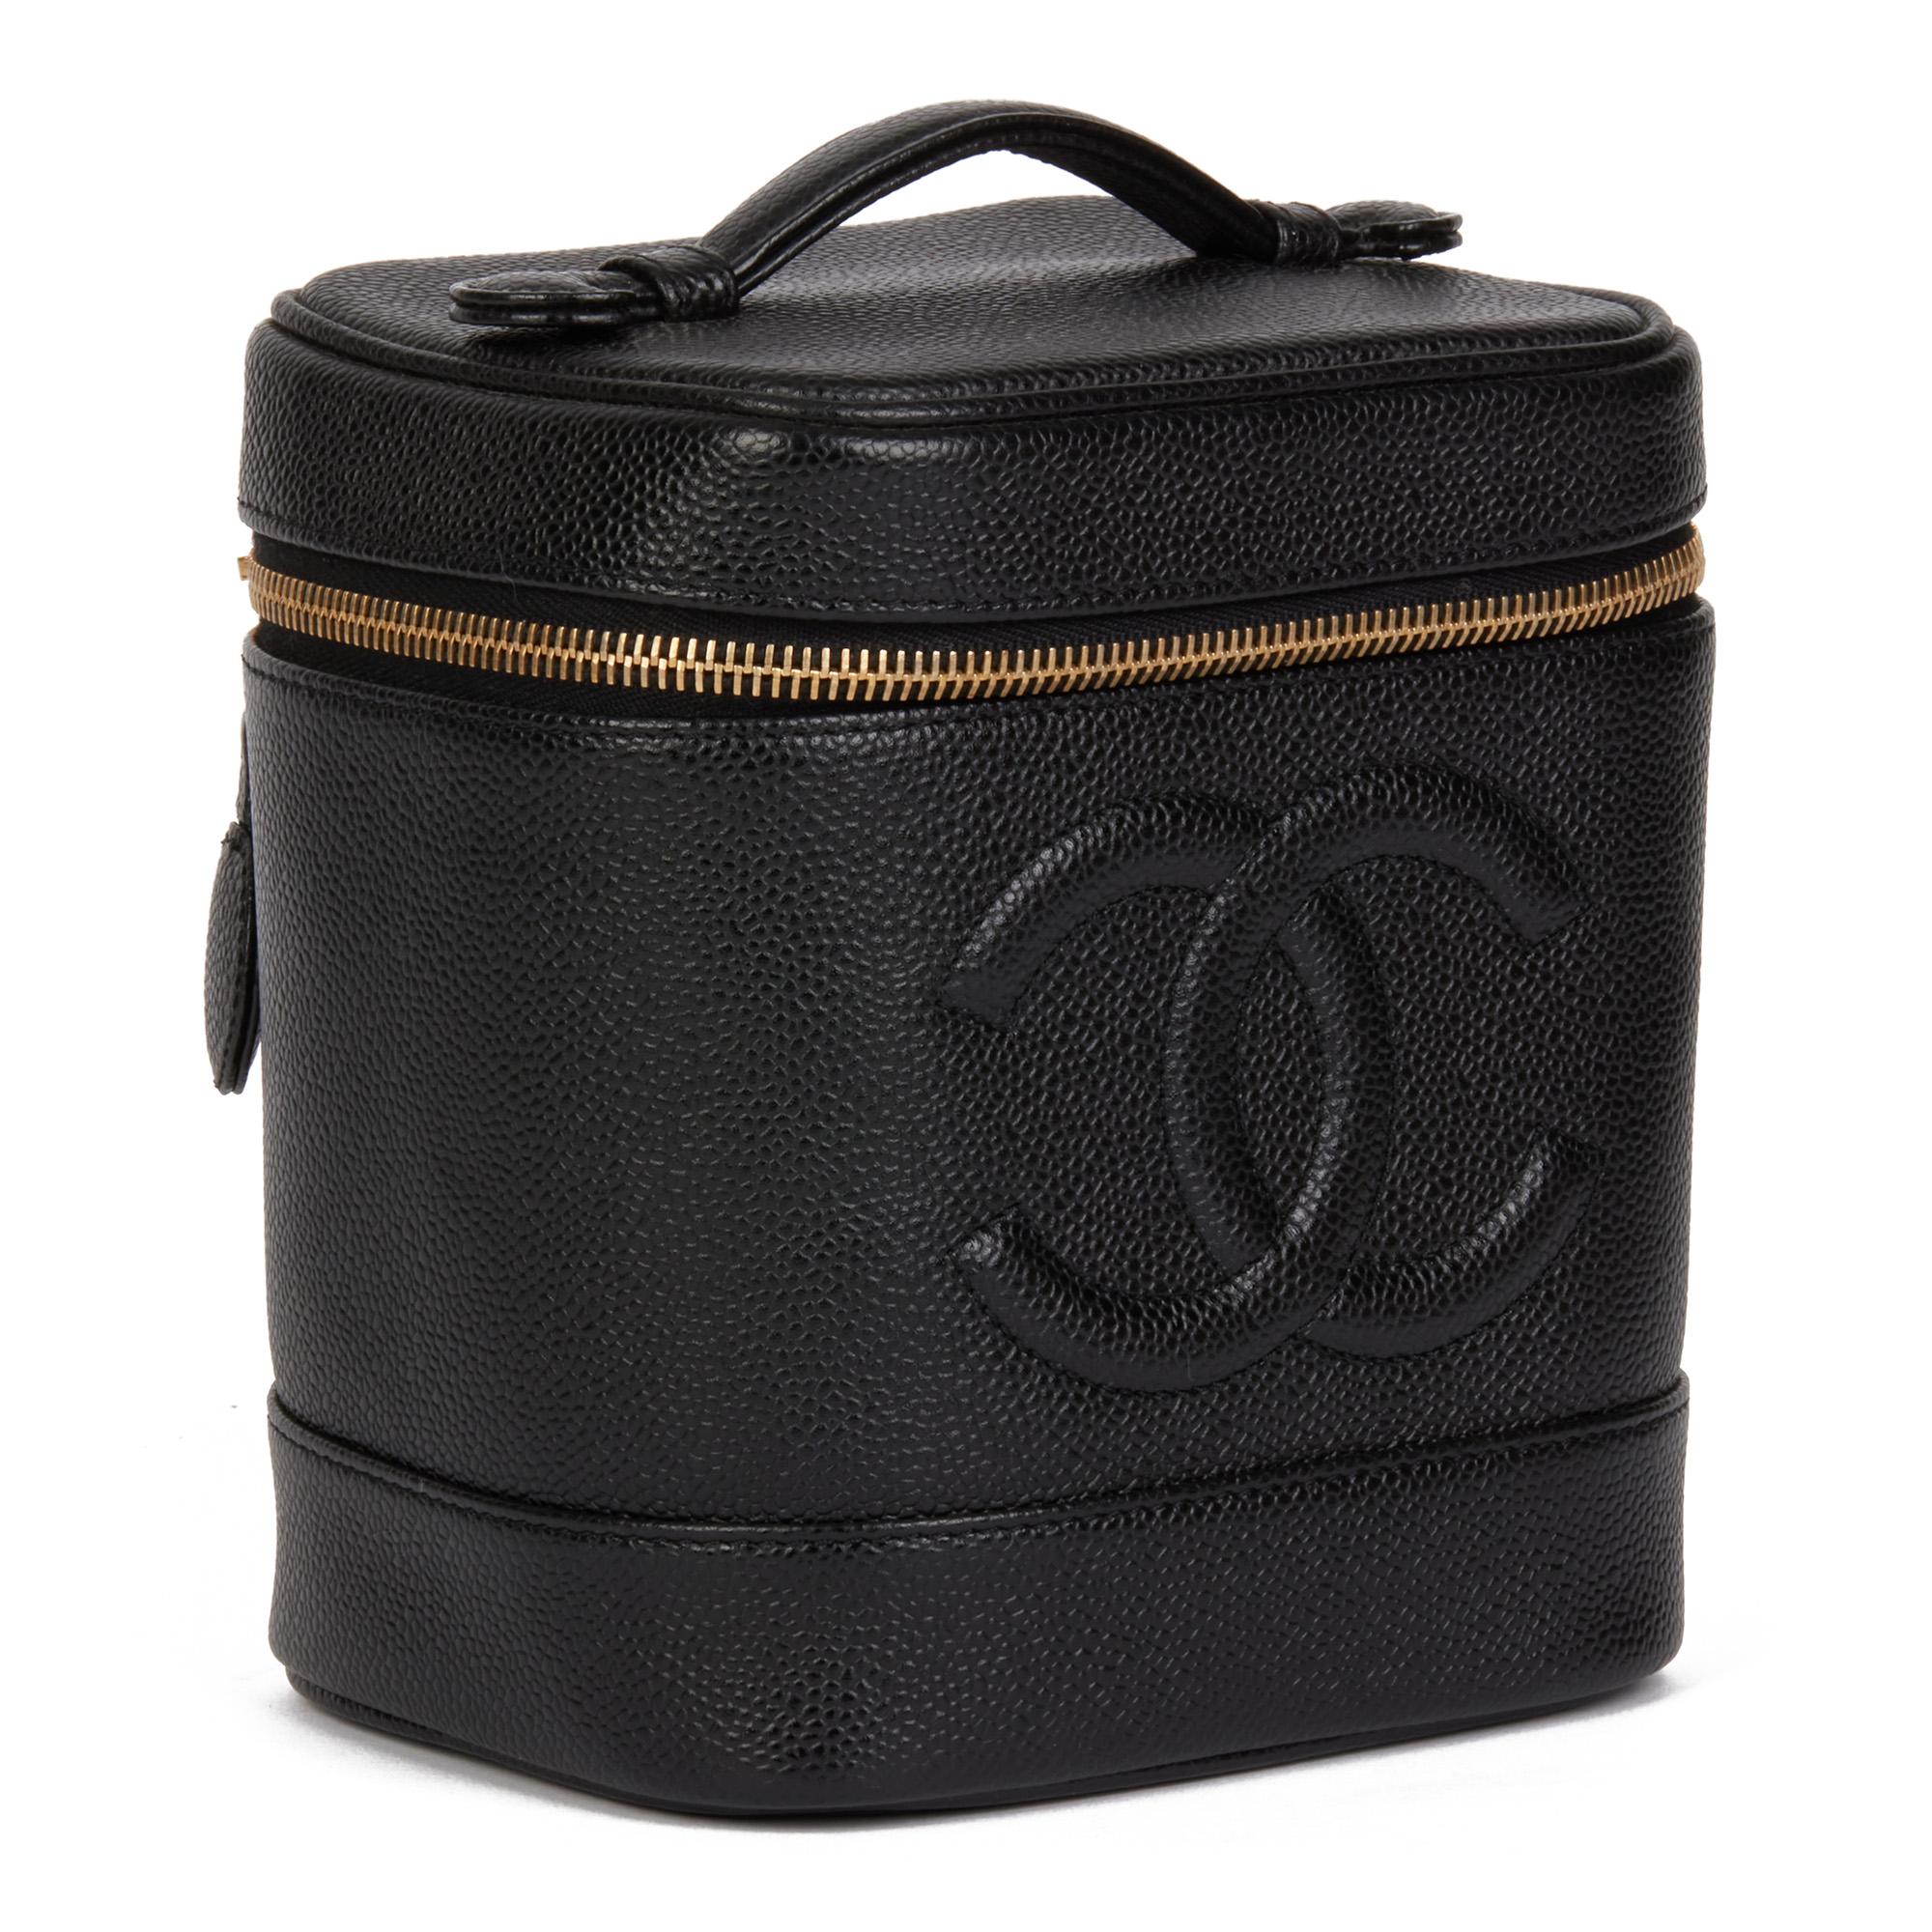 Chanel BLACK CAVIAR LEATHER VINTAGE TIMELESS VANITY CASE

CONDITION NOTES
The exterior is in excellent condition with minimal signs of use.
The interior is in excellent condition with minimal signs of use.
The hardware is in excellent condition with